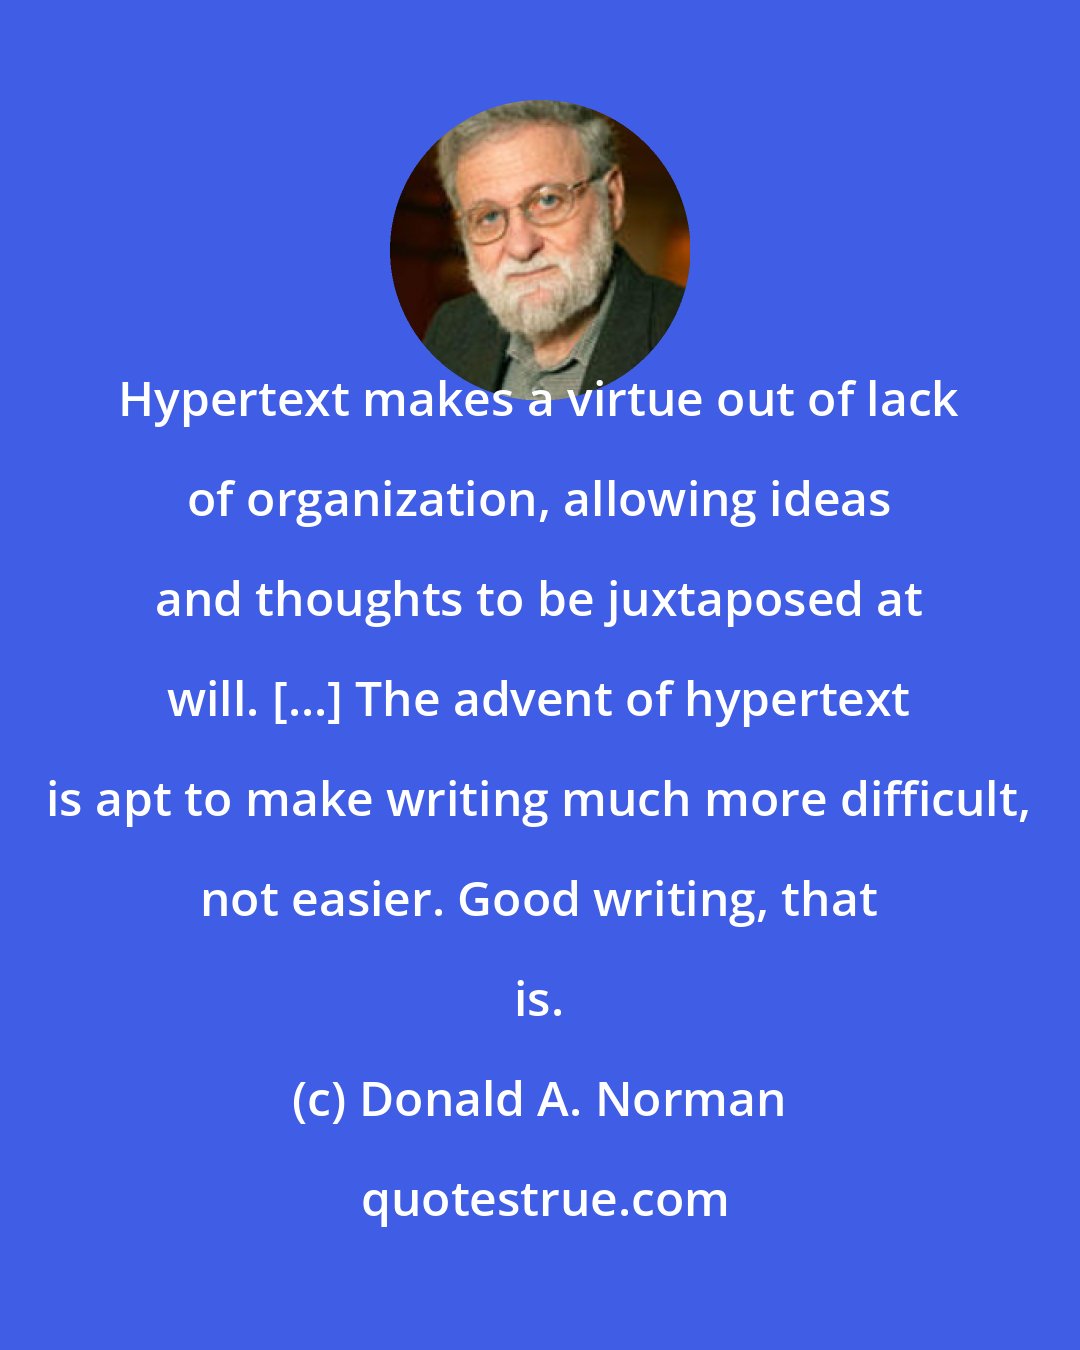 Donald A. Norman: Hypertext makes a virtue out of lack of organization, allowing ideas and thoughts to be juxtaposed at will. [...] The advent of hypertext is apt to make writing much more difficult, not easier. Good writing, that is.